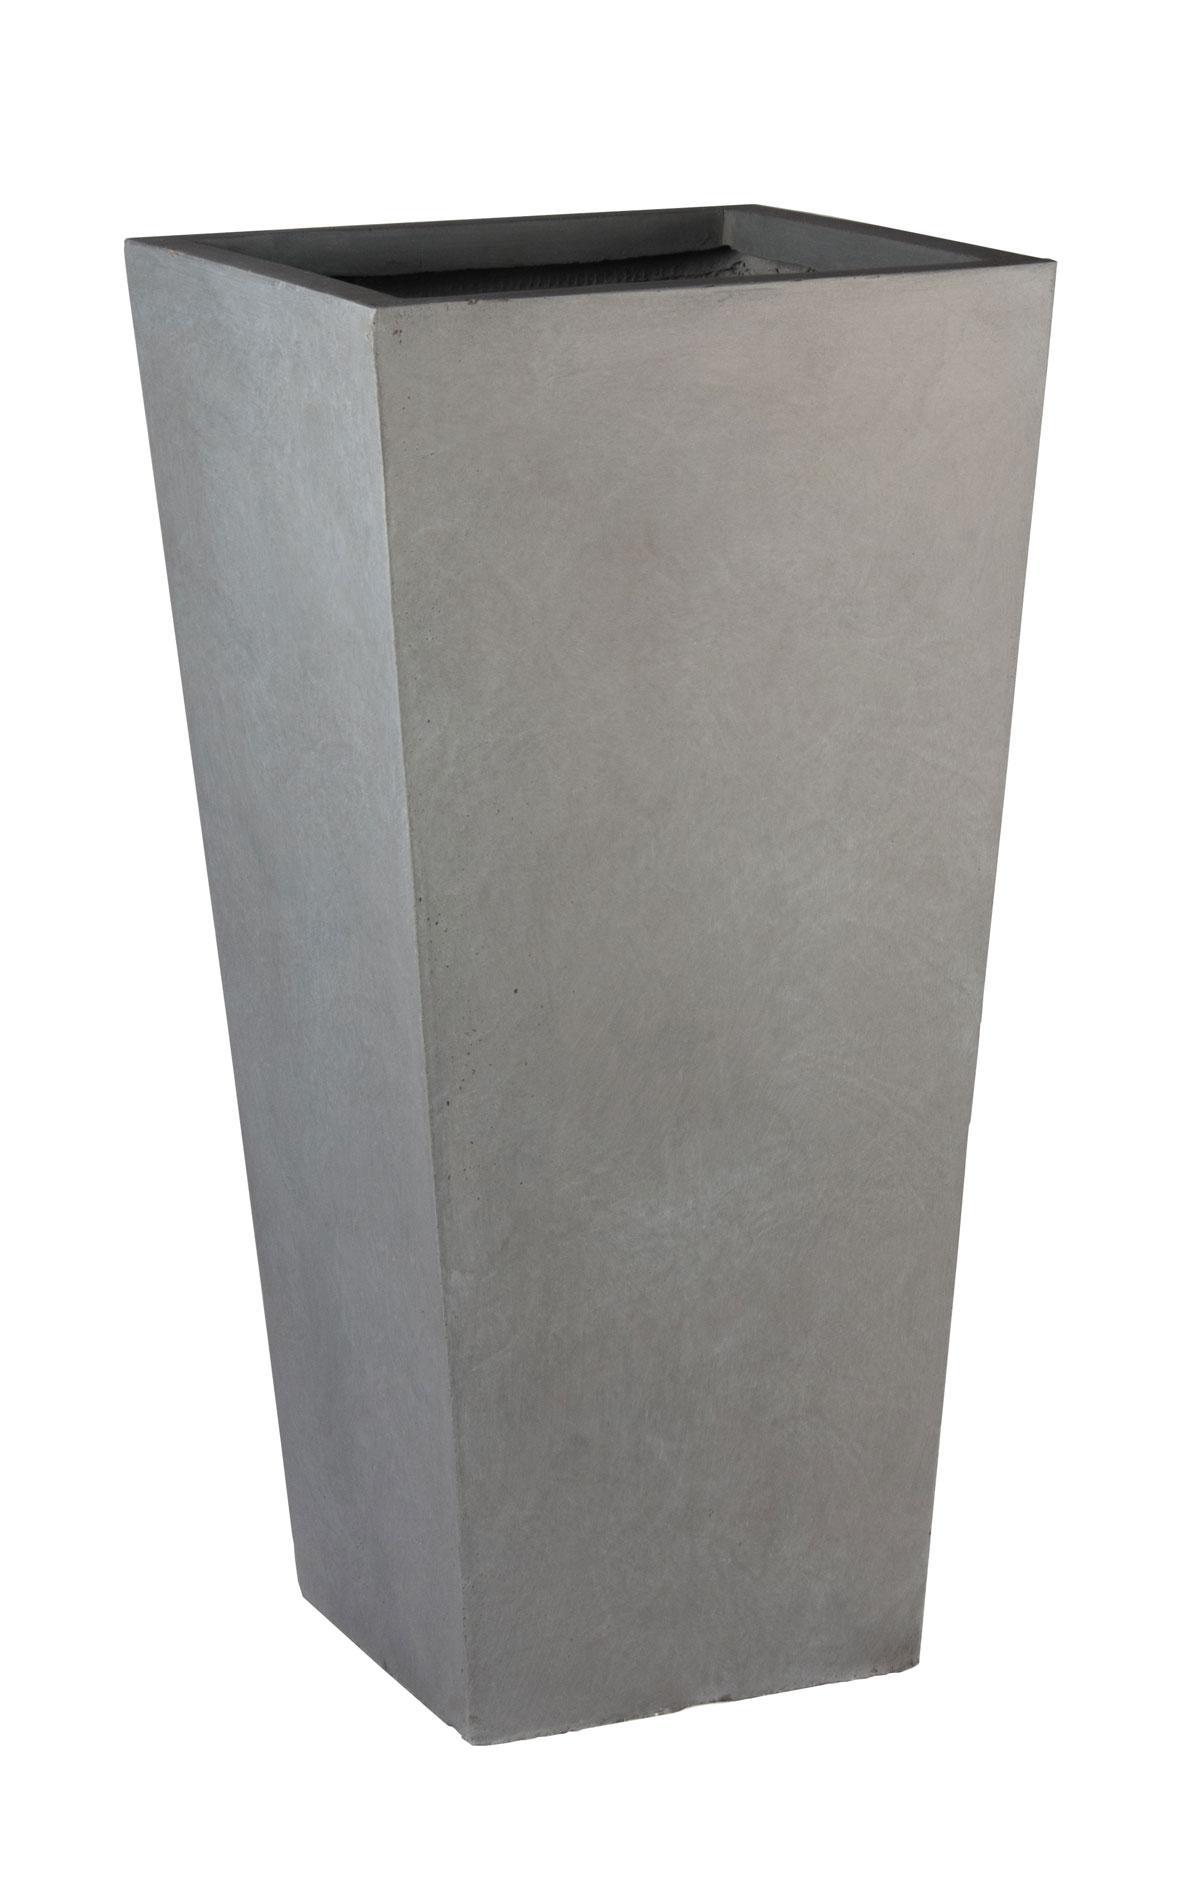 Tall Tapered Contemporary Light Concrete Planter by IDEALIST Lite - citiplants.com